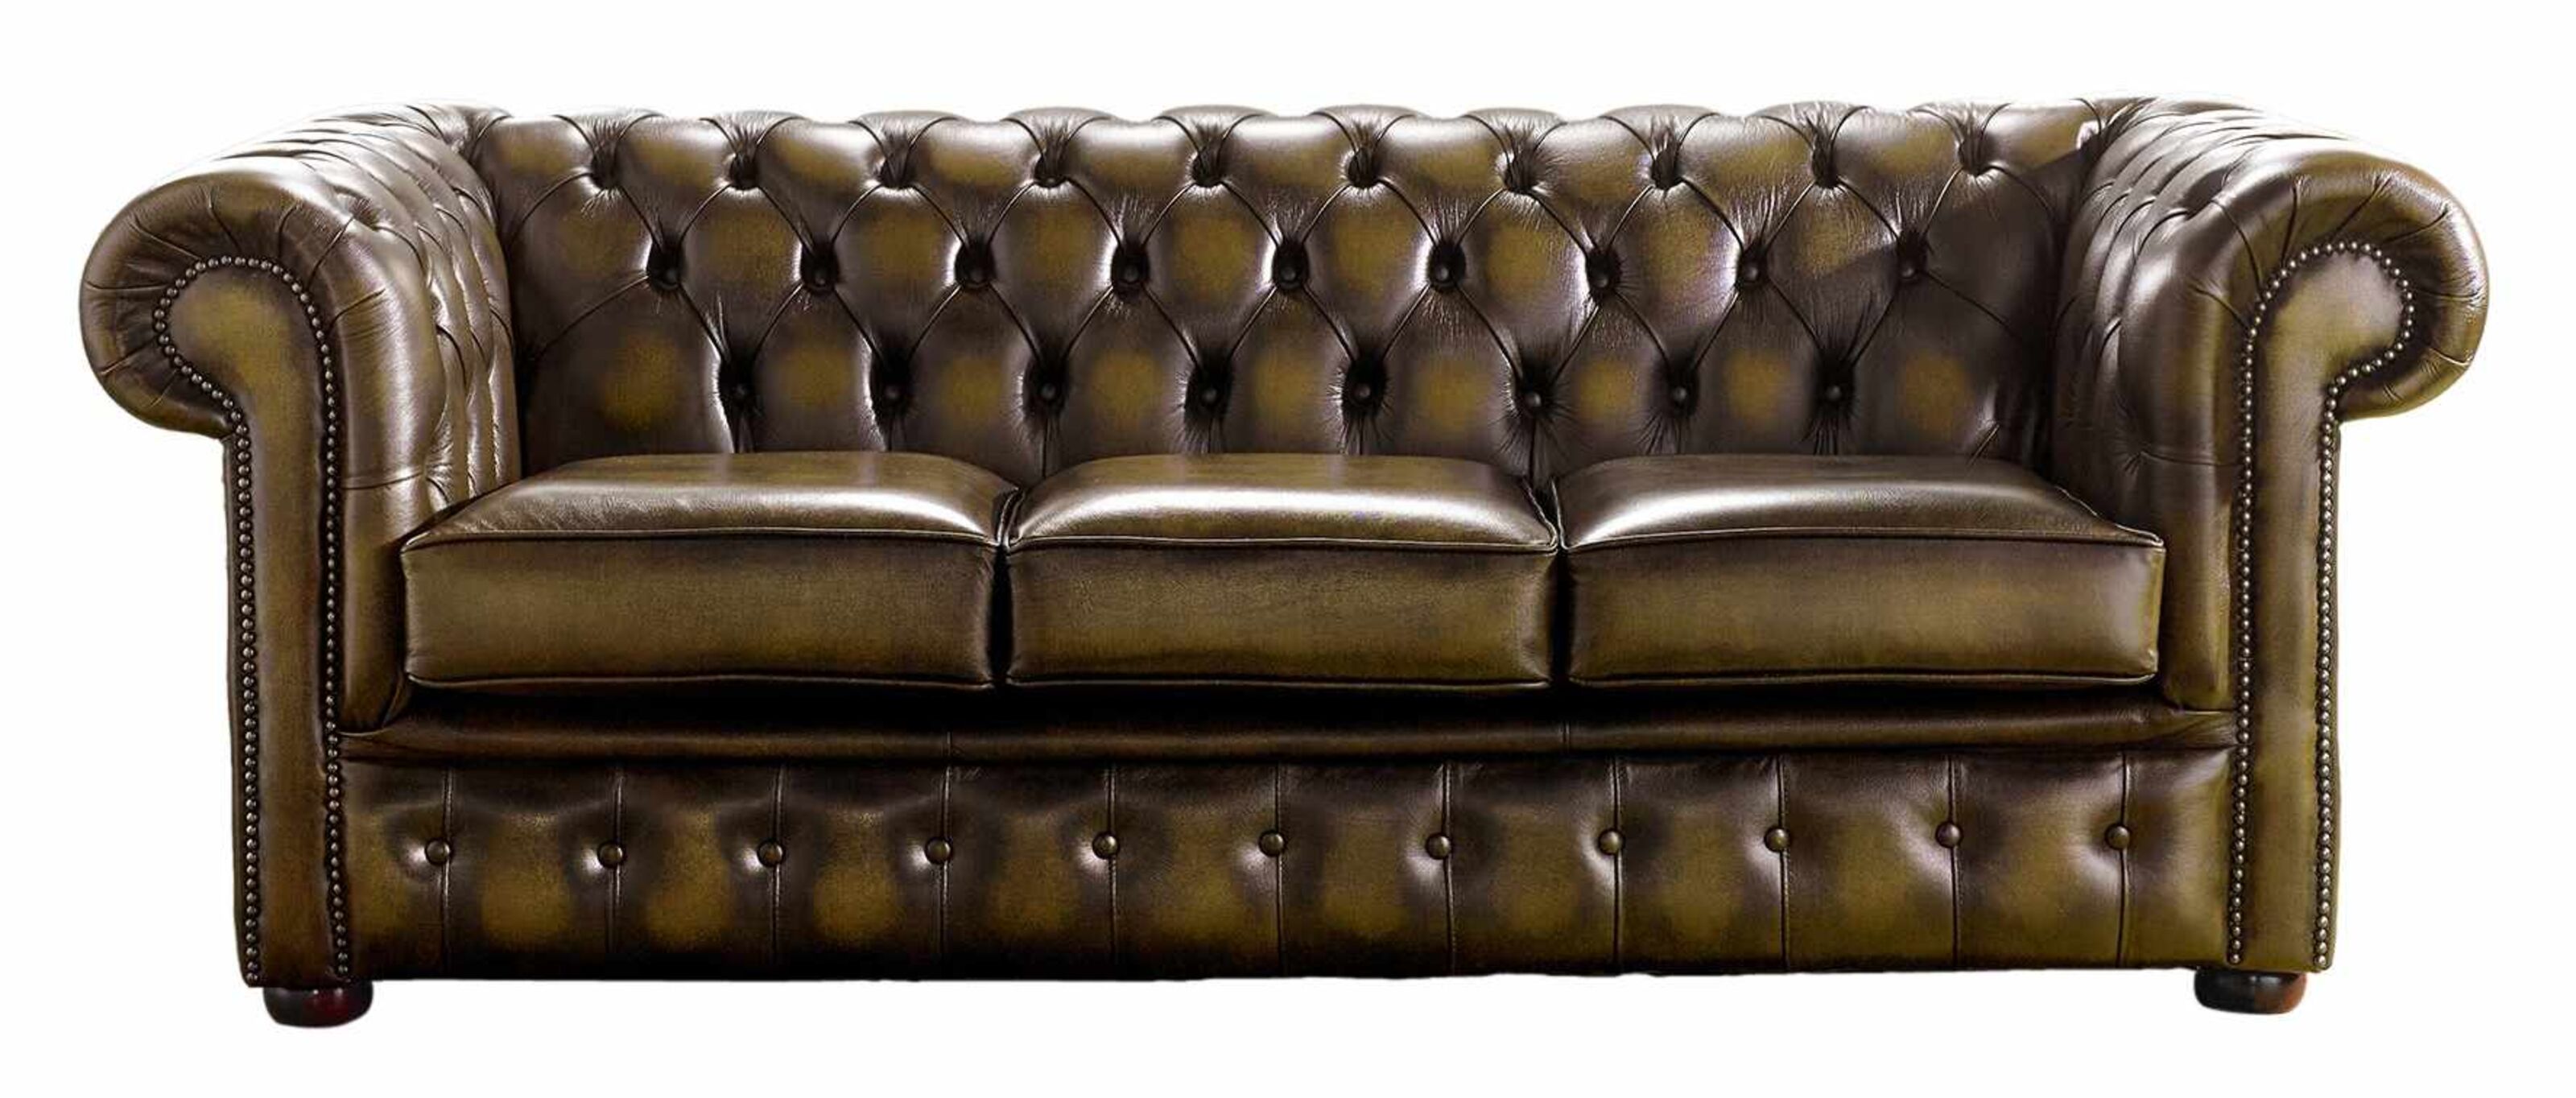 Shielding Style Chesterfield Sofa Arm Covers  %Post Title